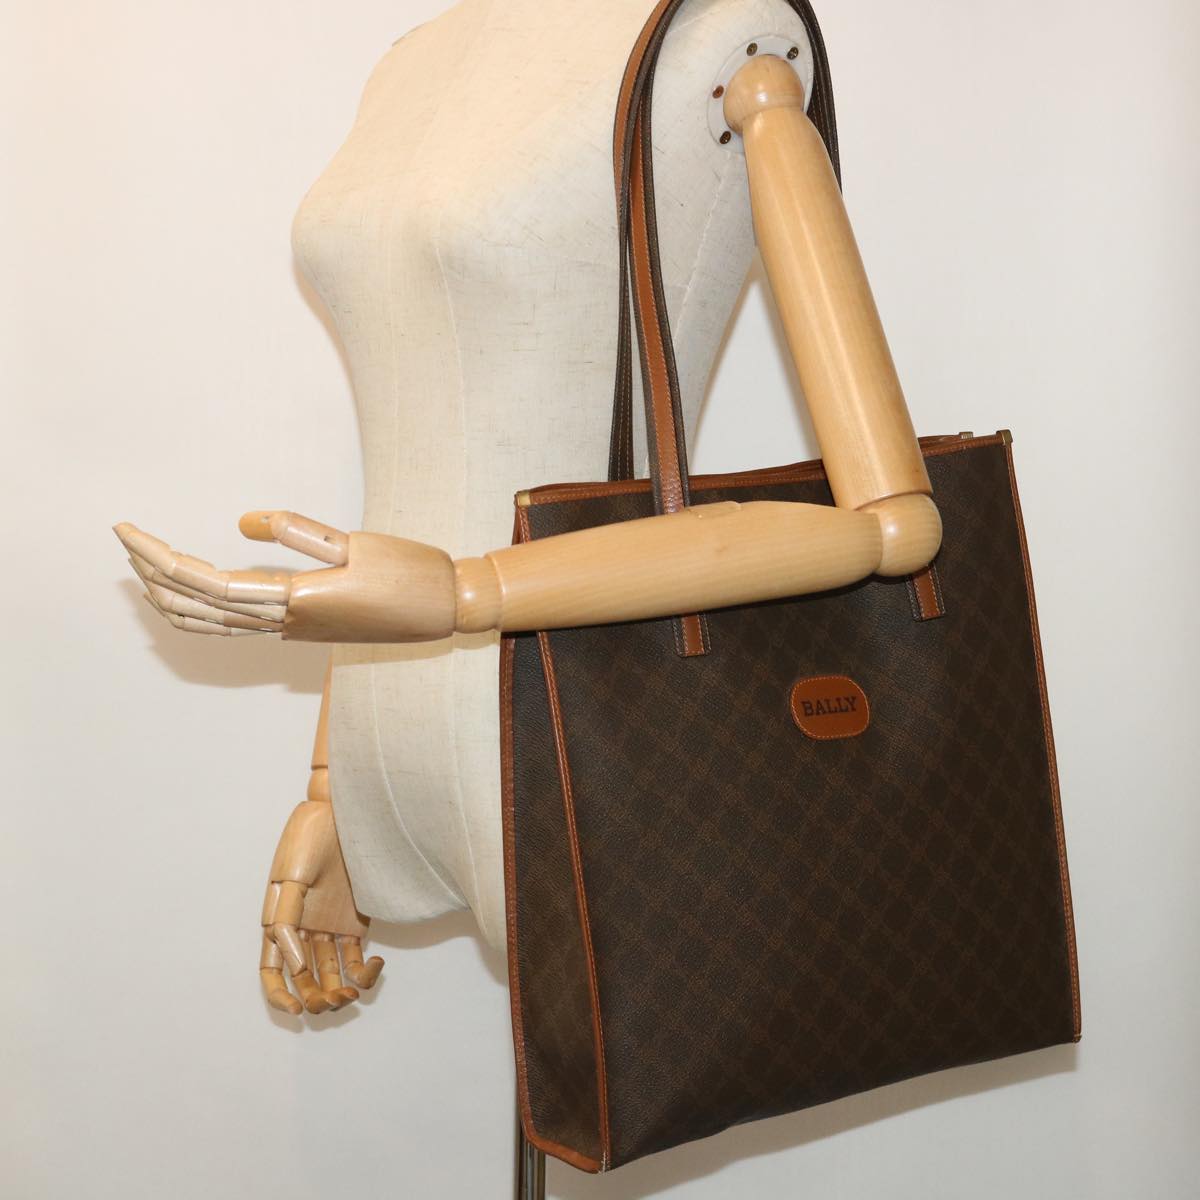 BALLY Tote Bag PVC Leather Brown Auth bs7388